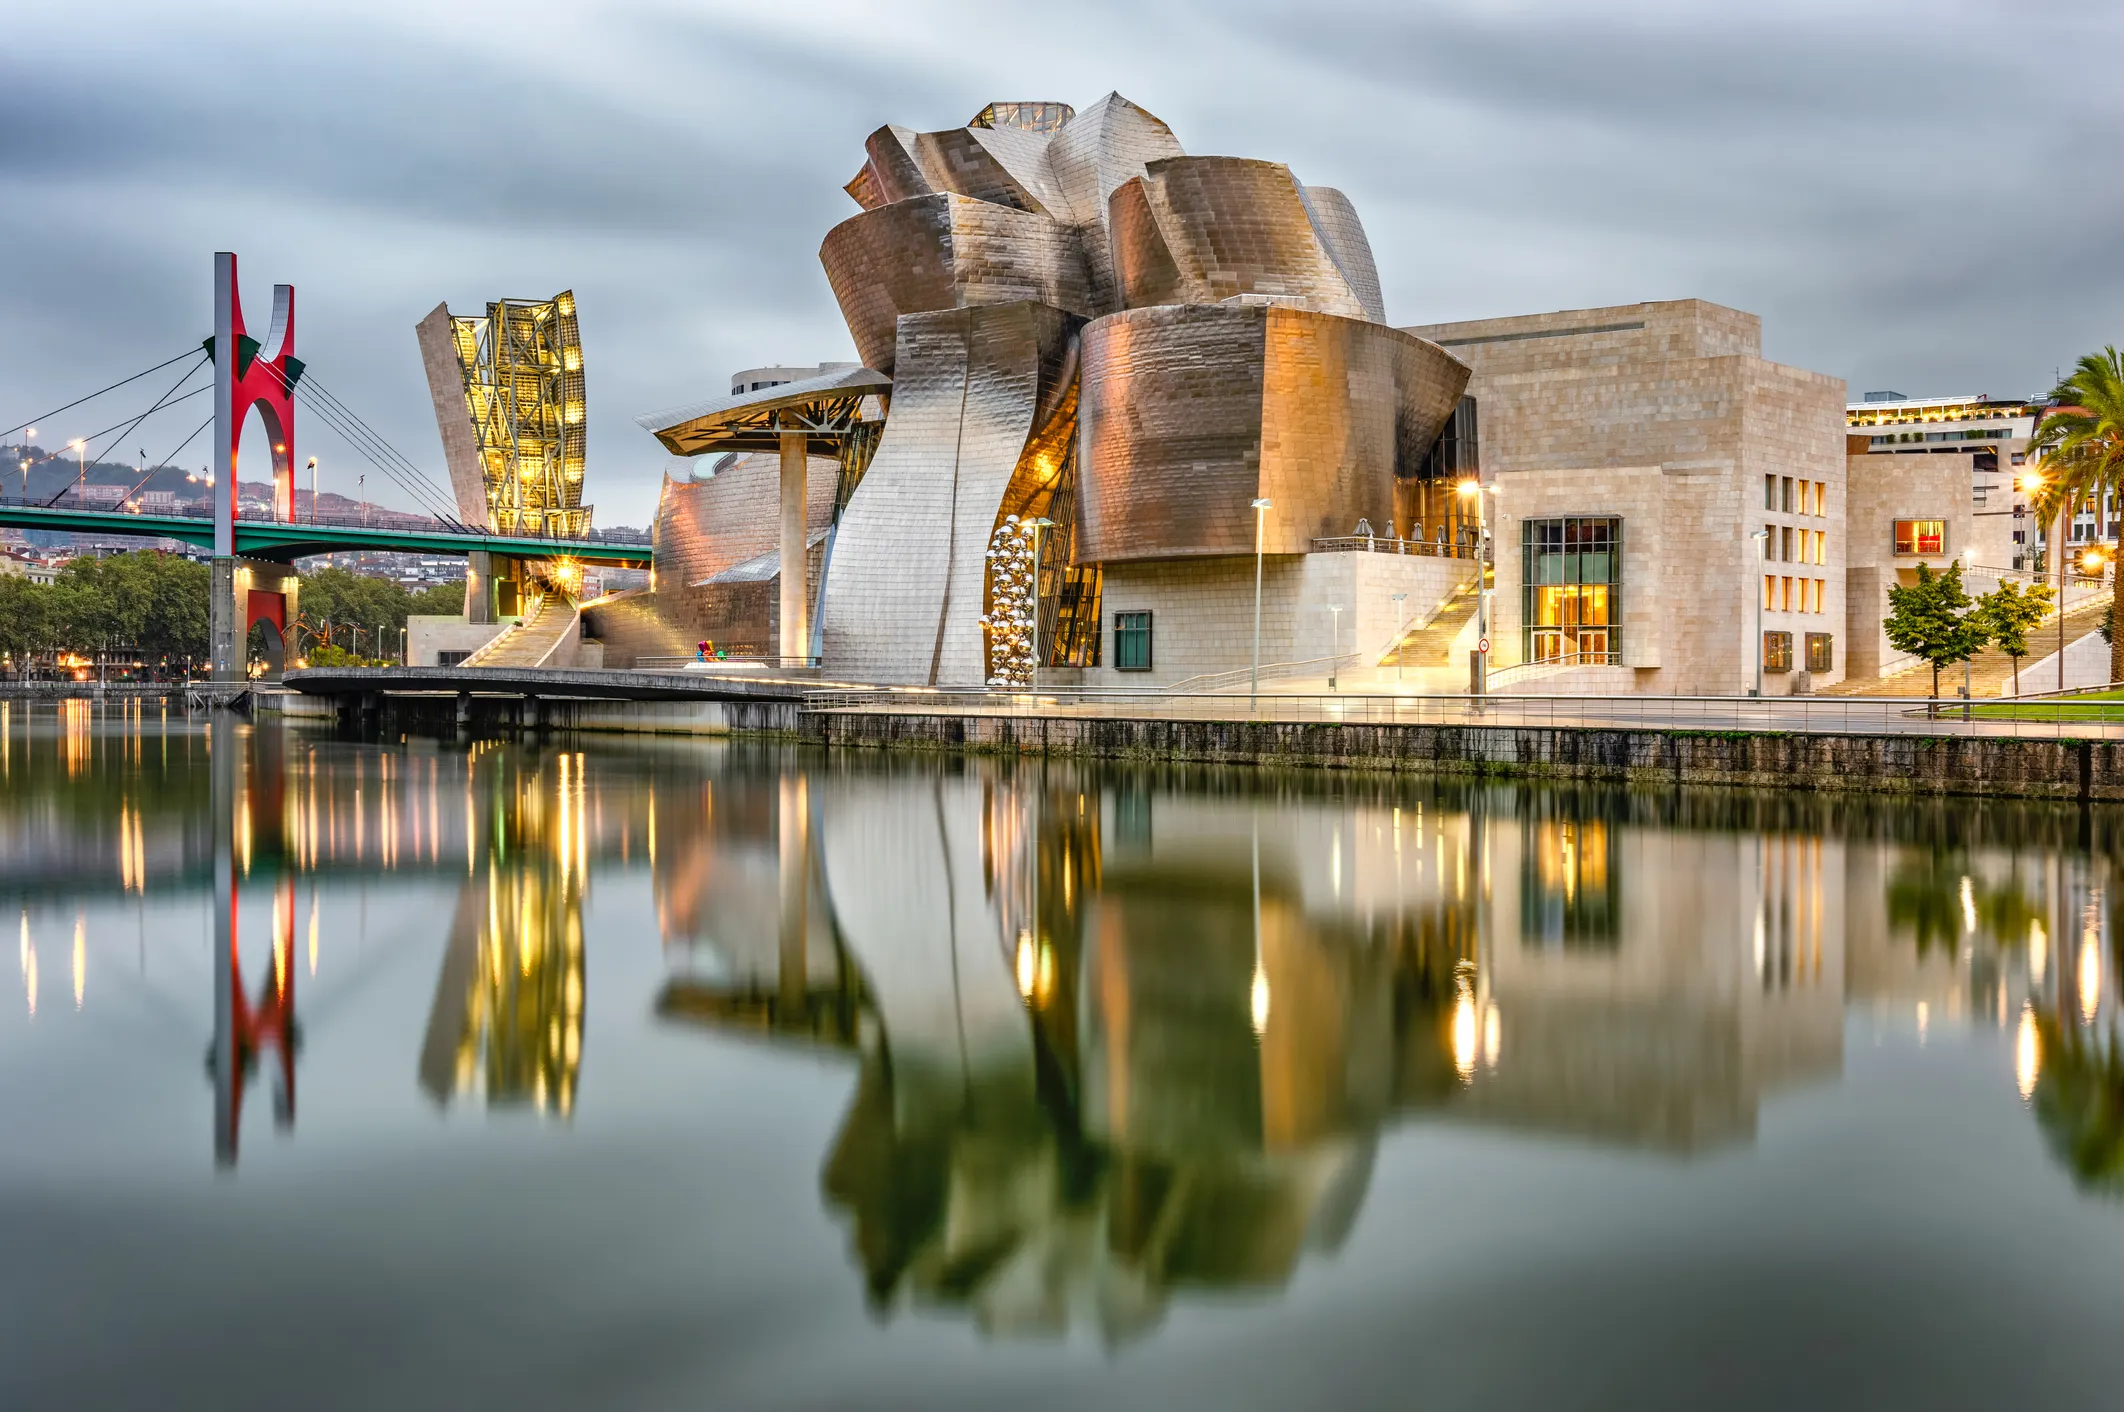 Picasso’s paintings inspired the snazzy architecture of the Bilbao Guggenheim museum. 